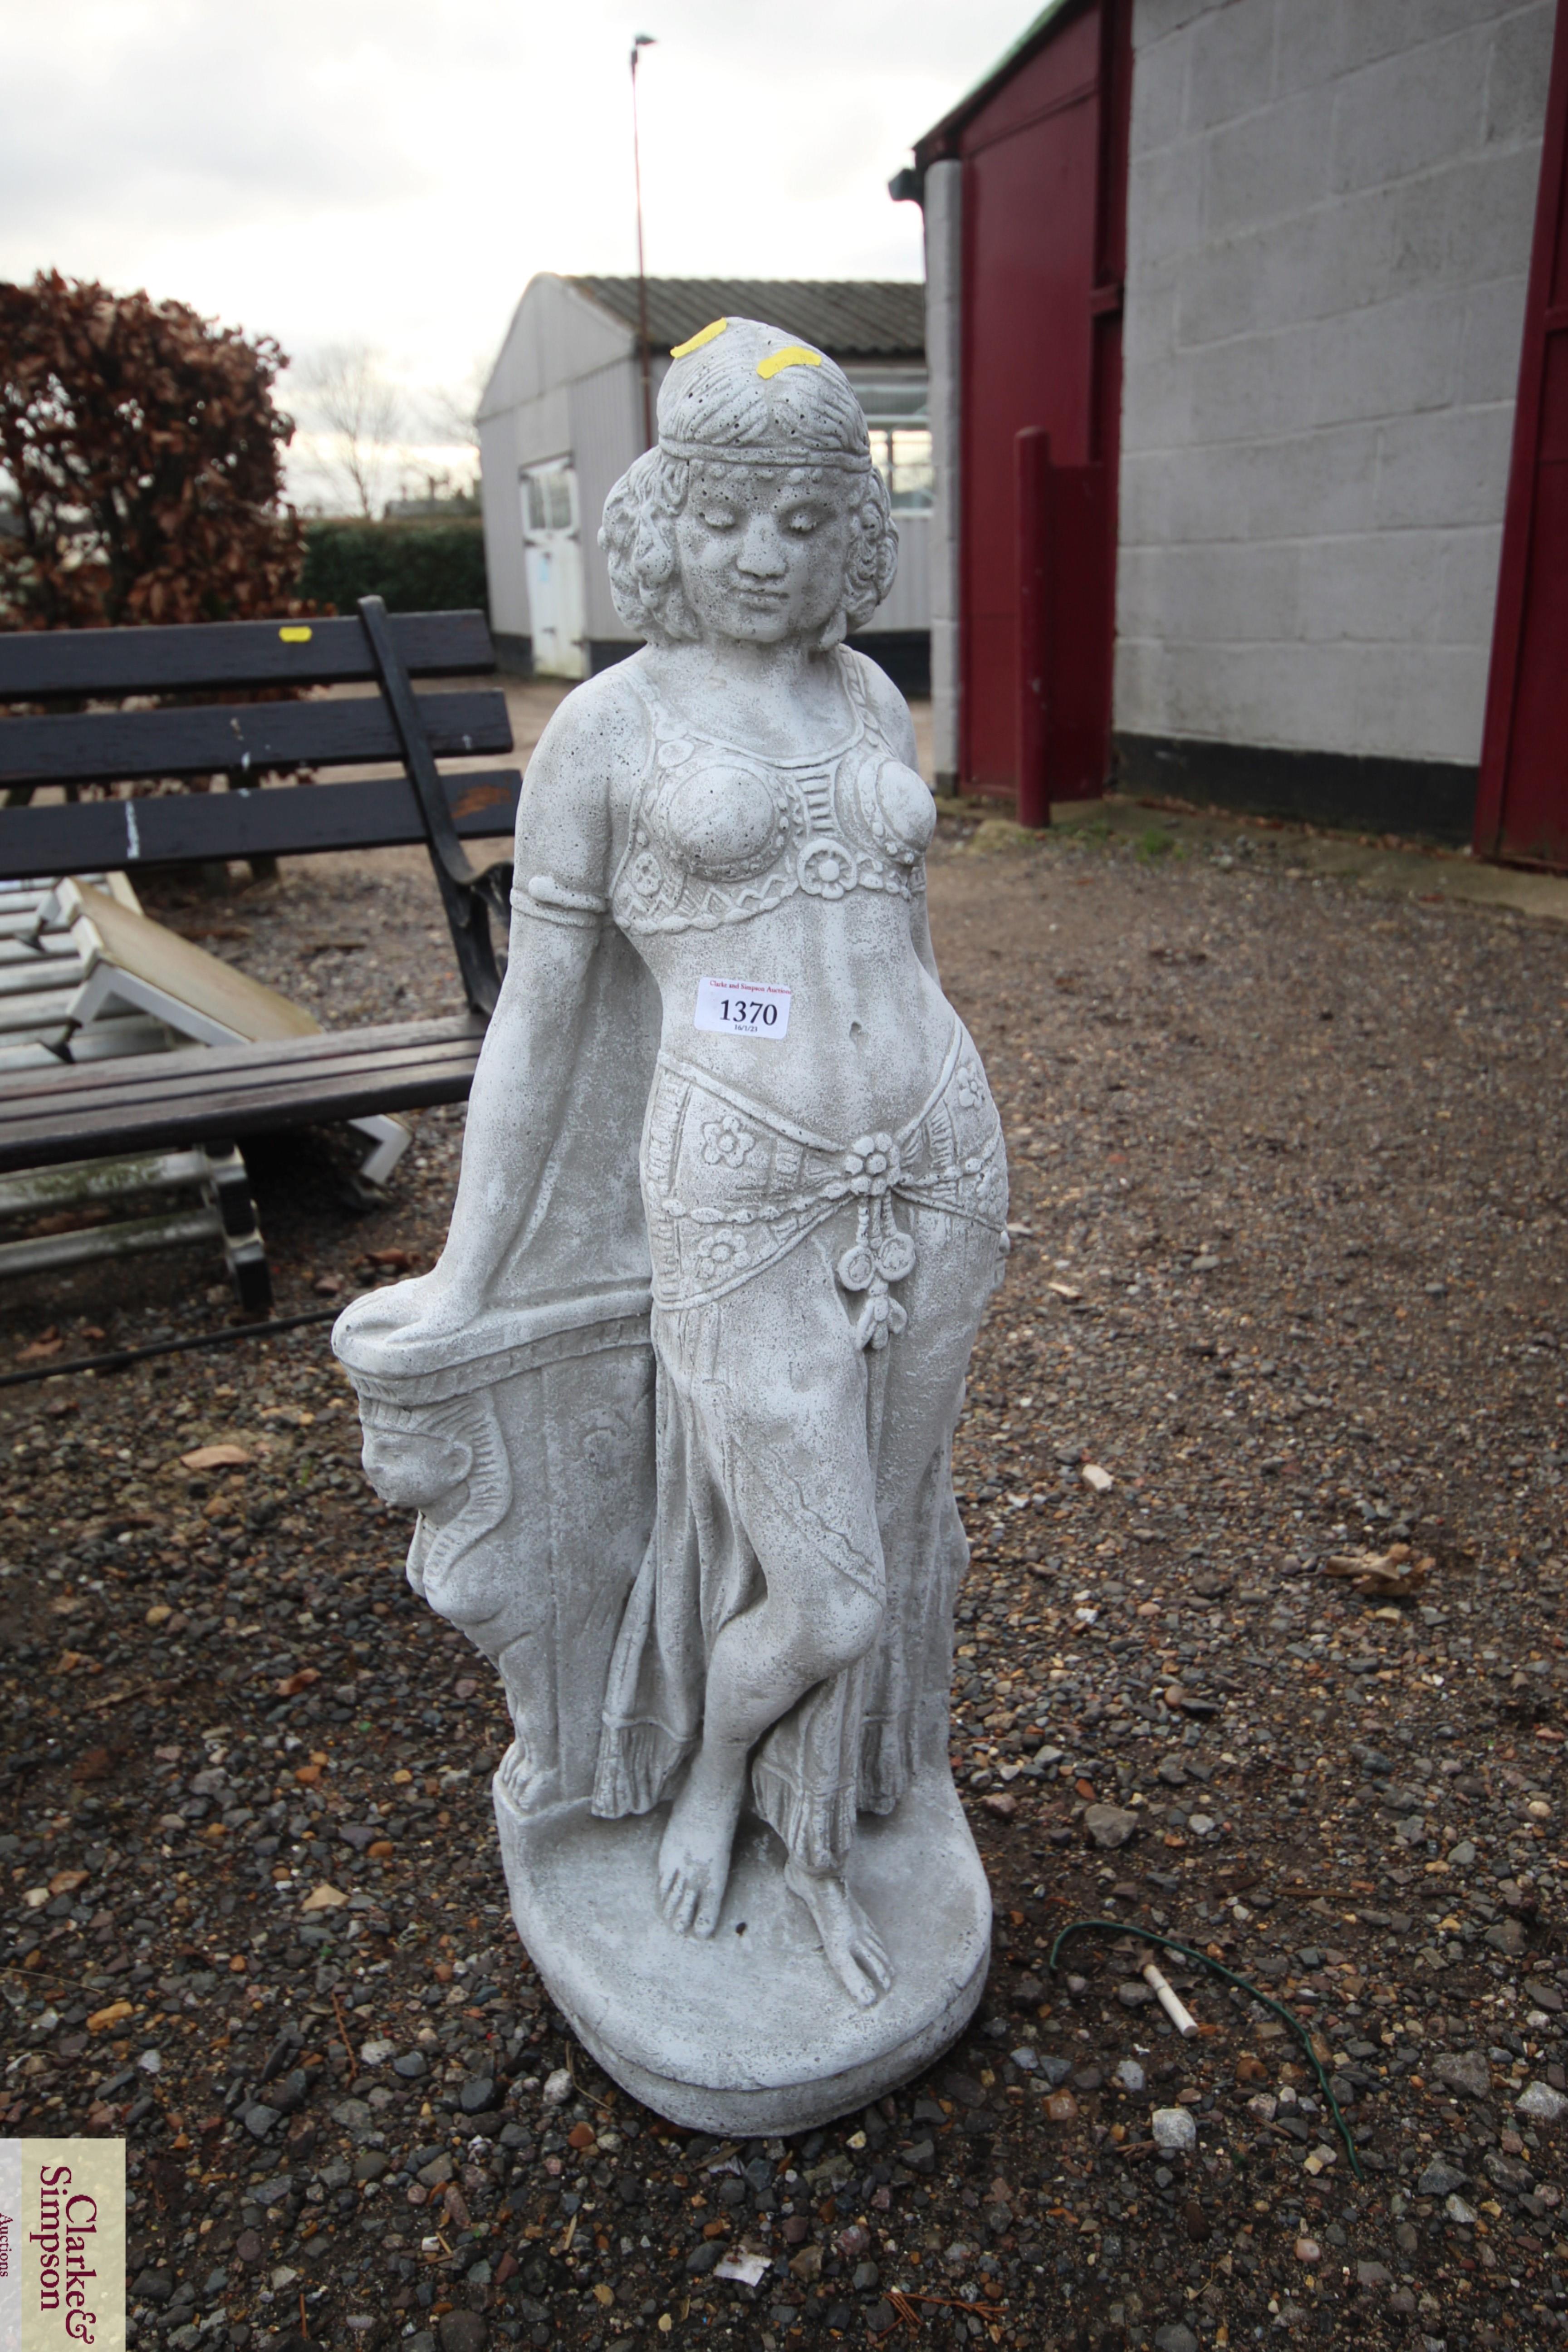 A concrete ornament in the form of Cleopatra